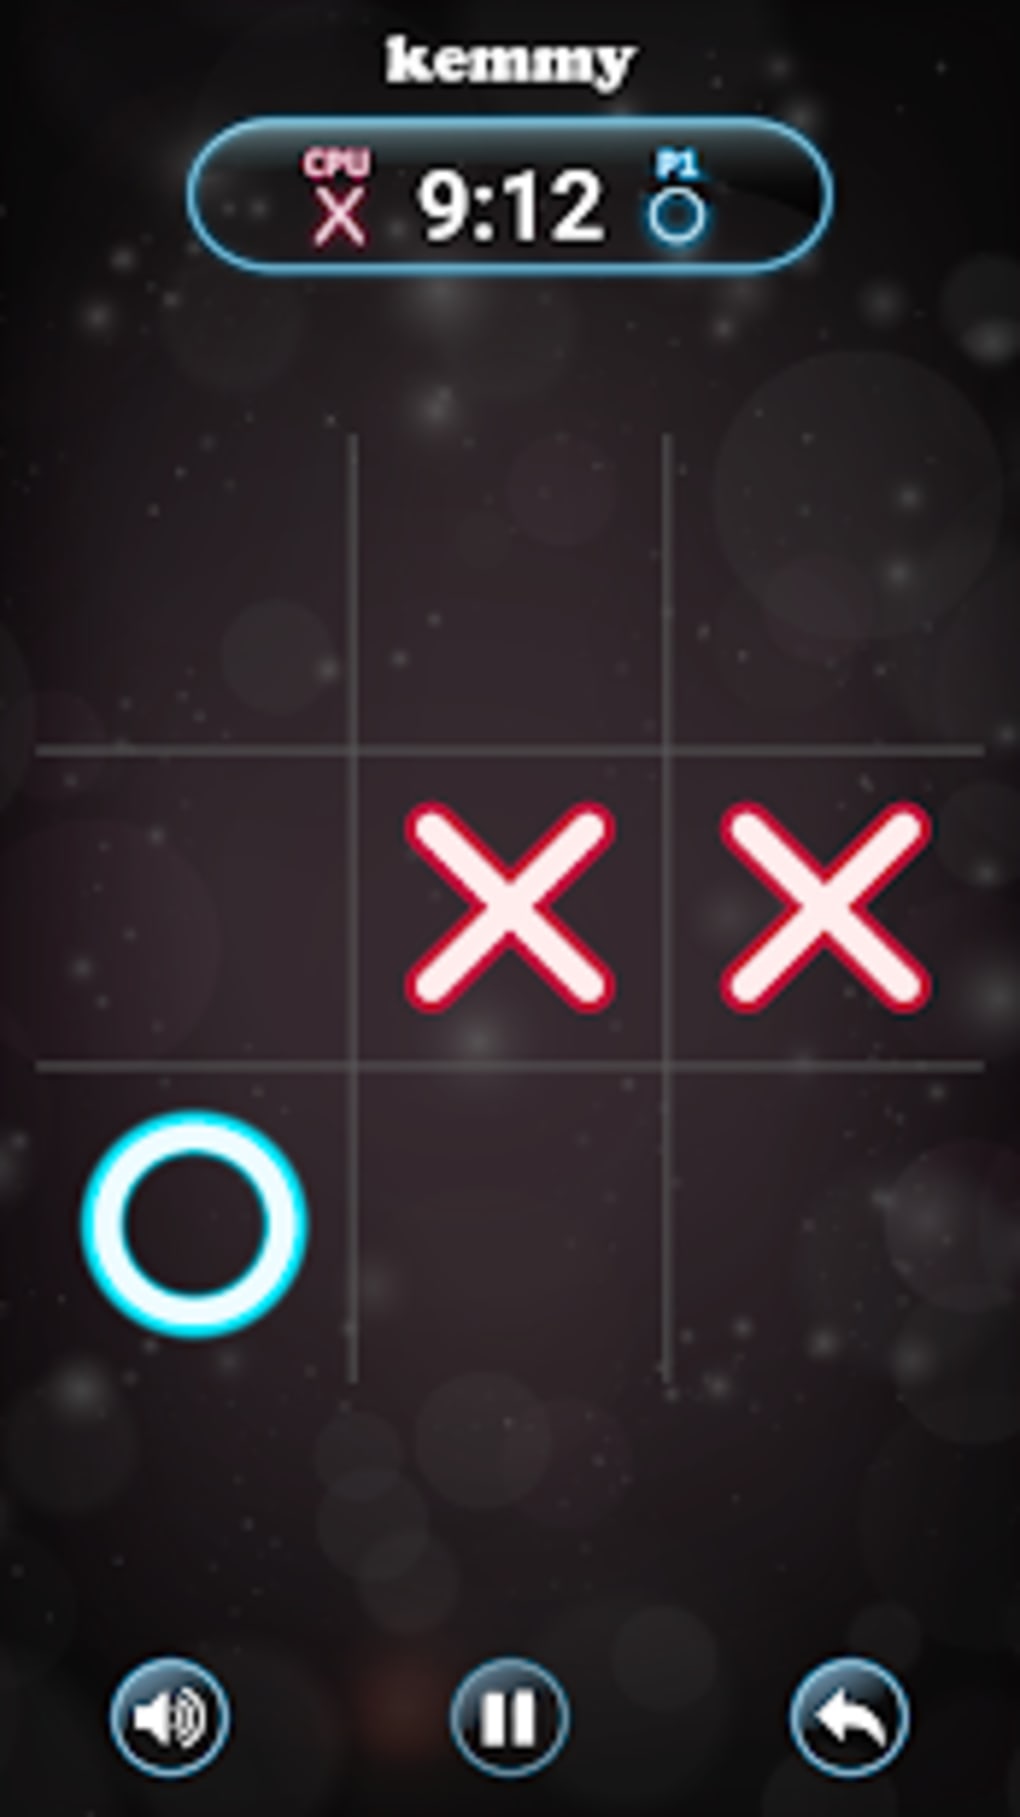 Tic Tac Toe Glow Game for Android - Download